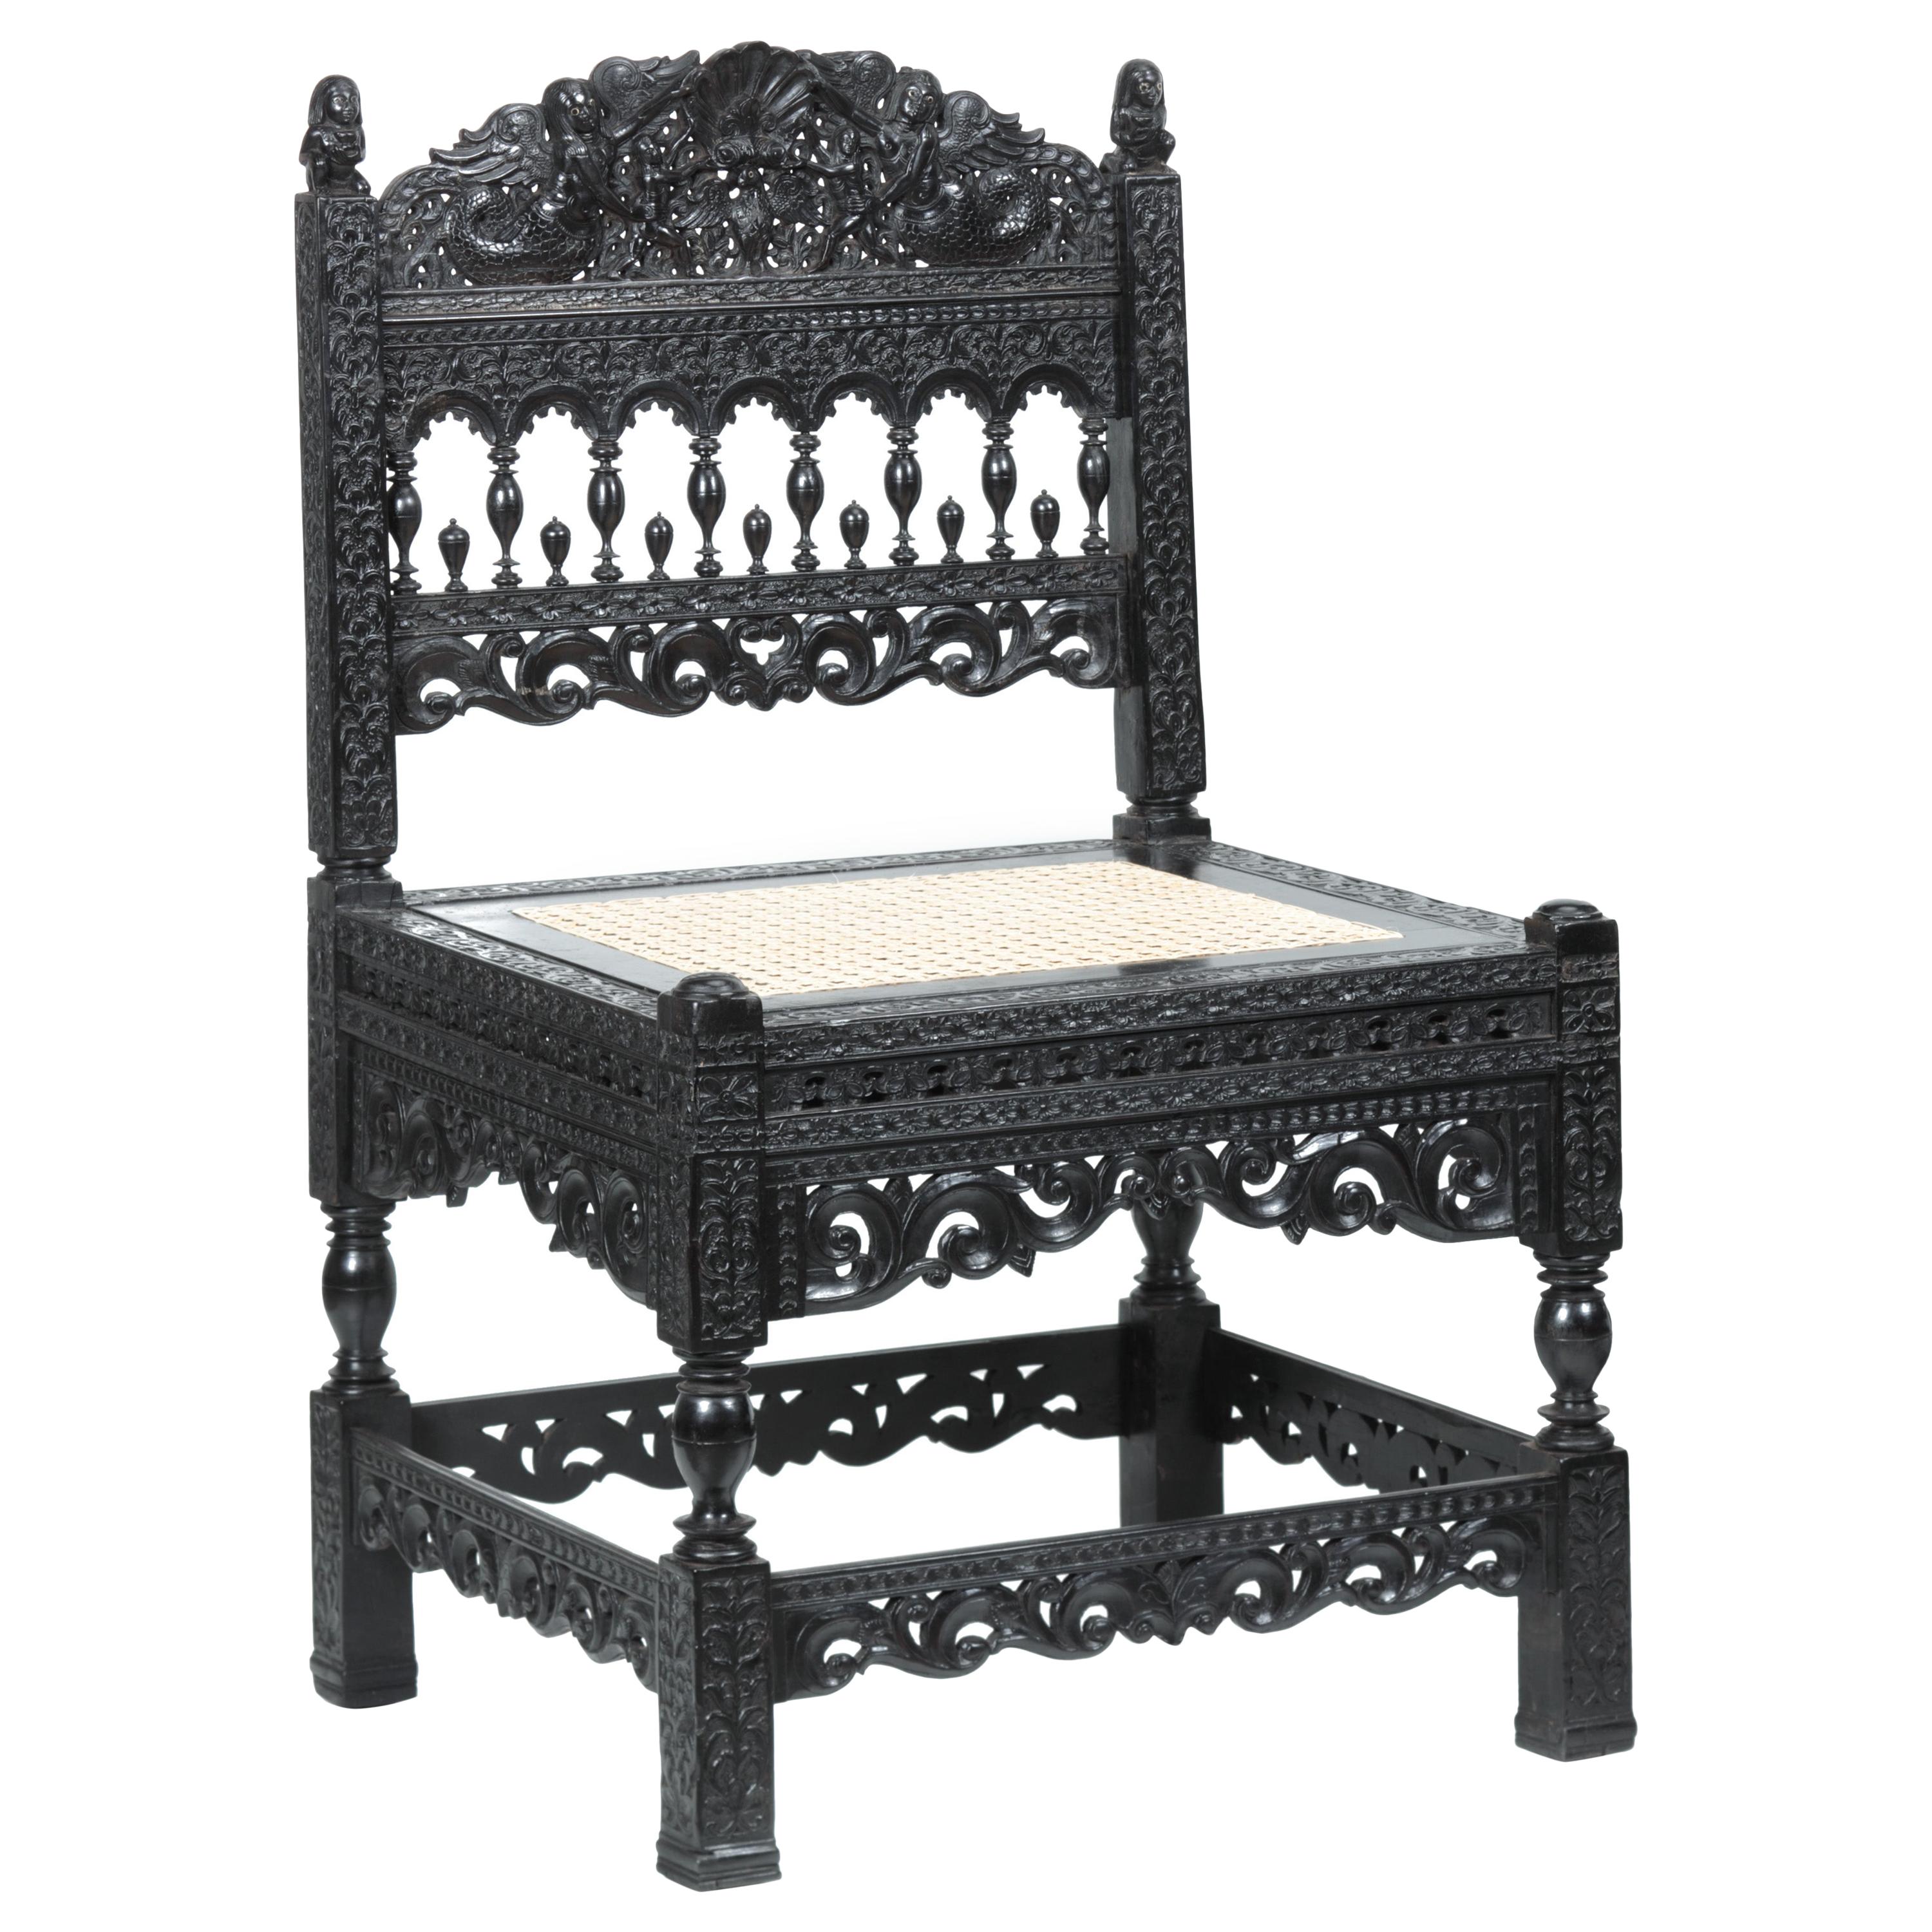 17th Cent. Dutch Colonial Ebony Chair Formerly Owned by the Duke of Westminster